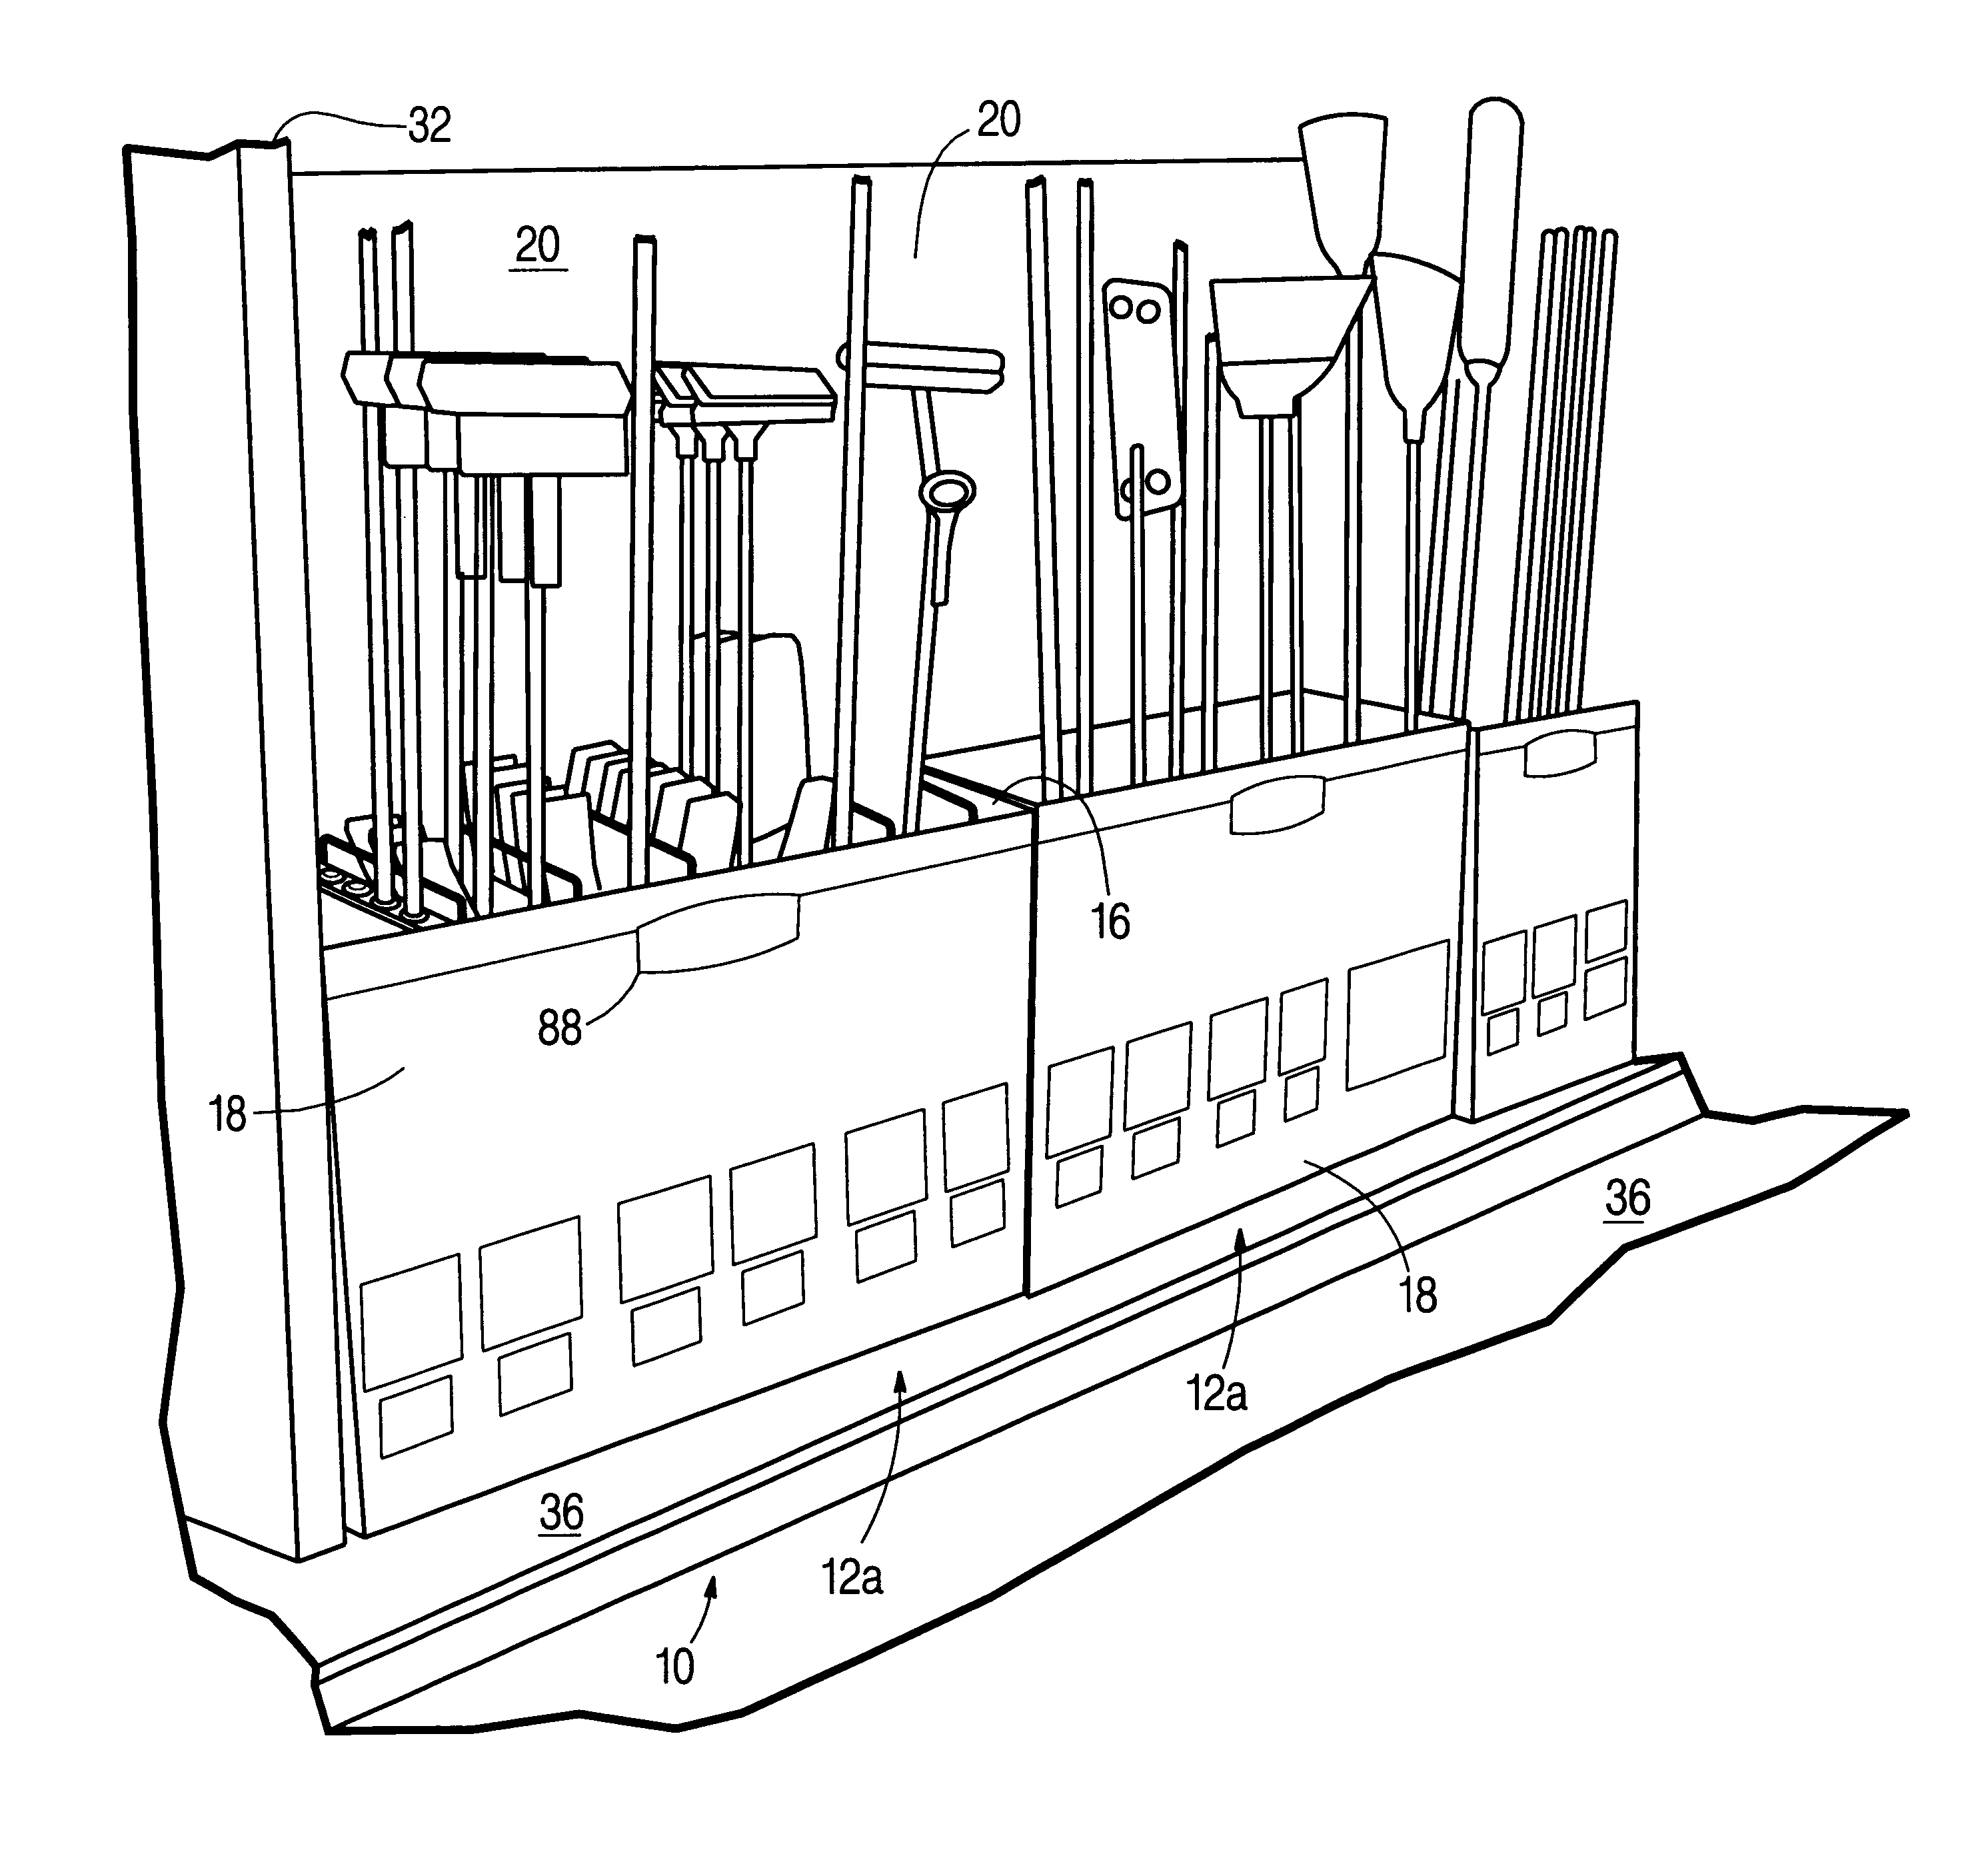 Apparatus and method of merchandising products